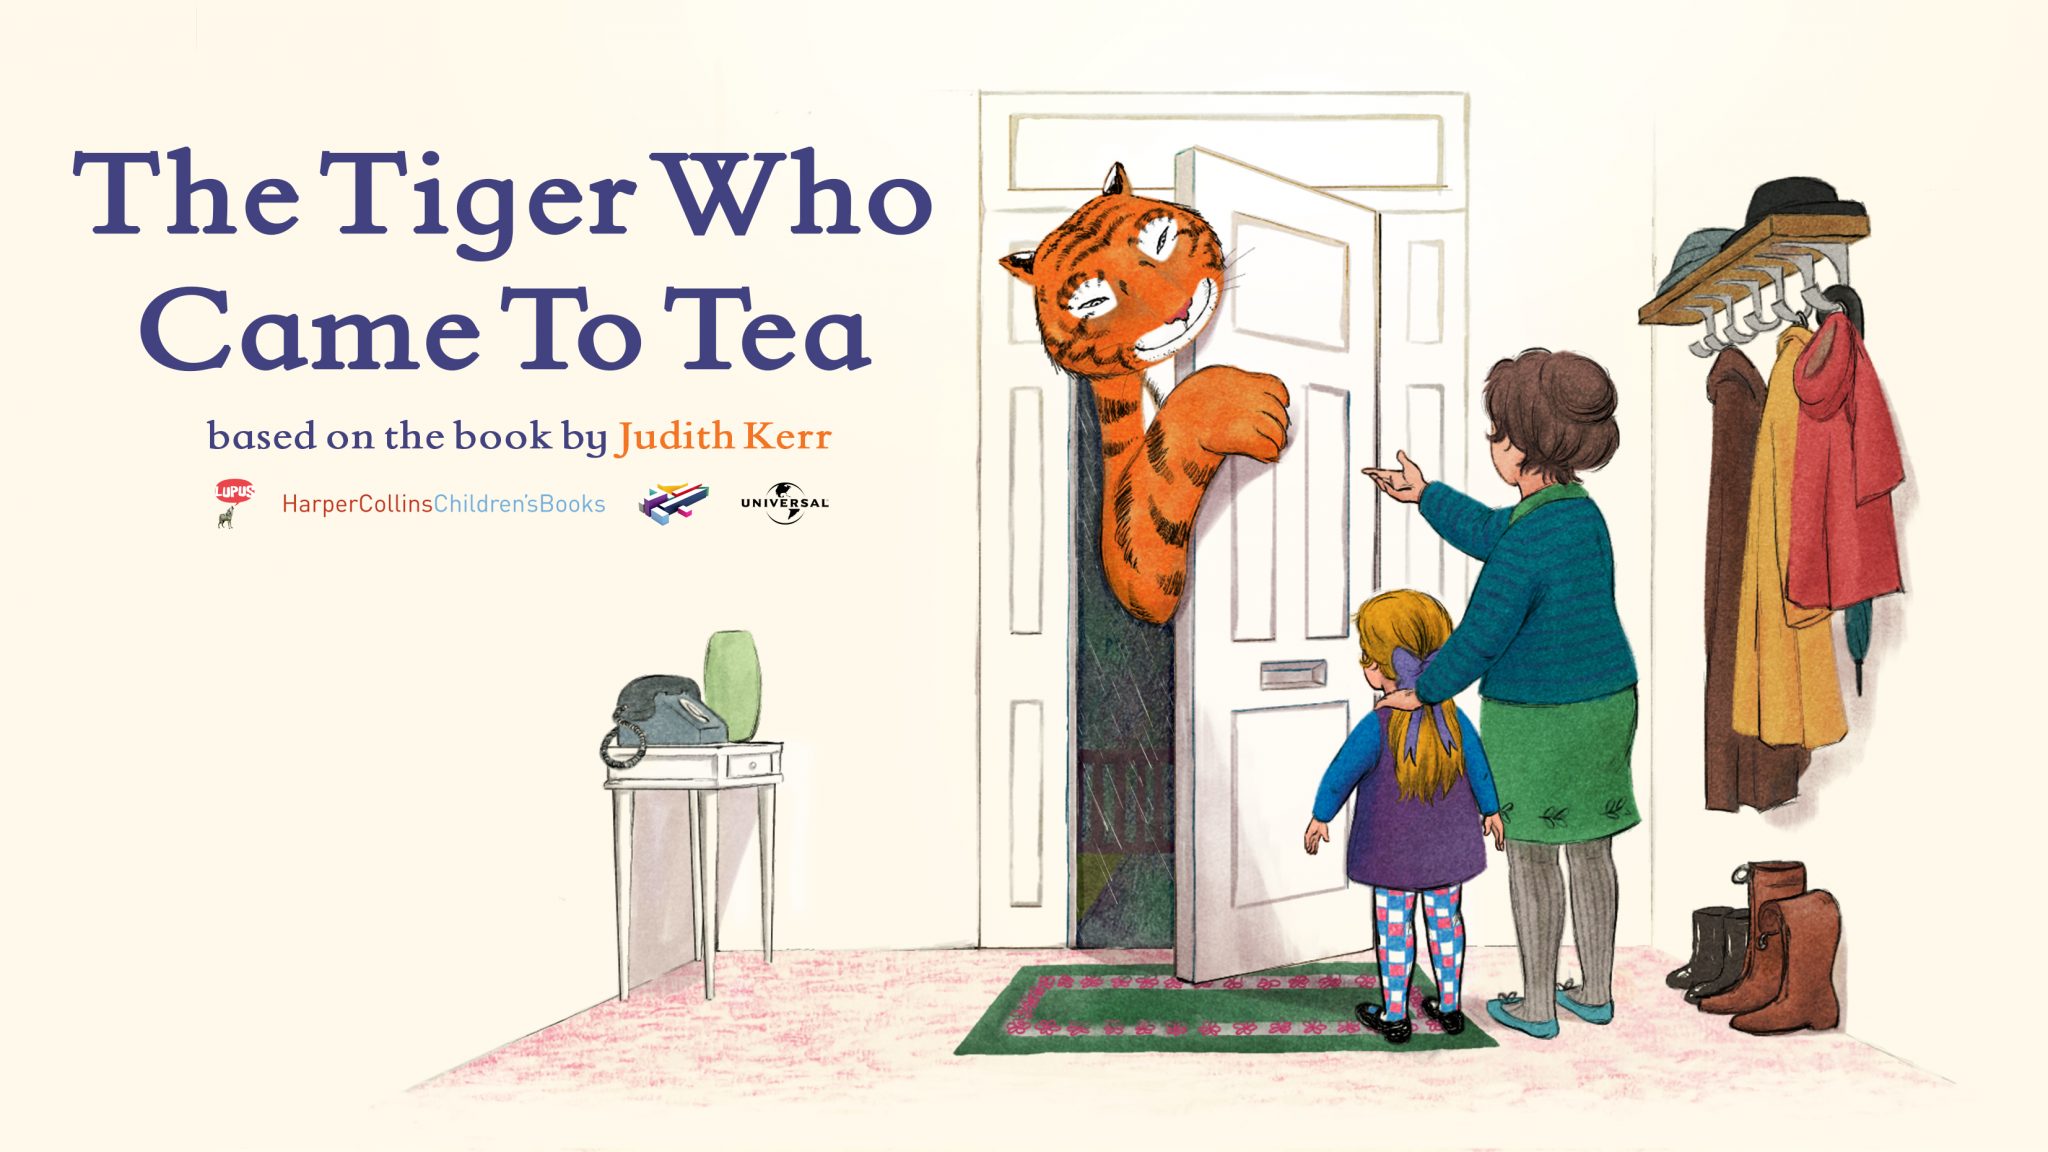 The Tiger Who Came to Tea promotional image, courtesy of Lupus Films